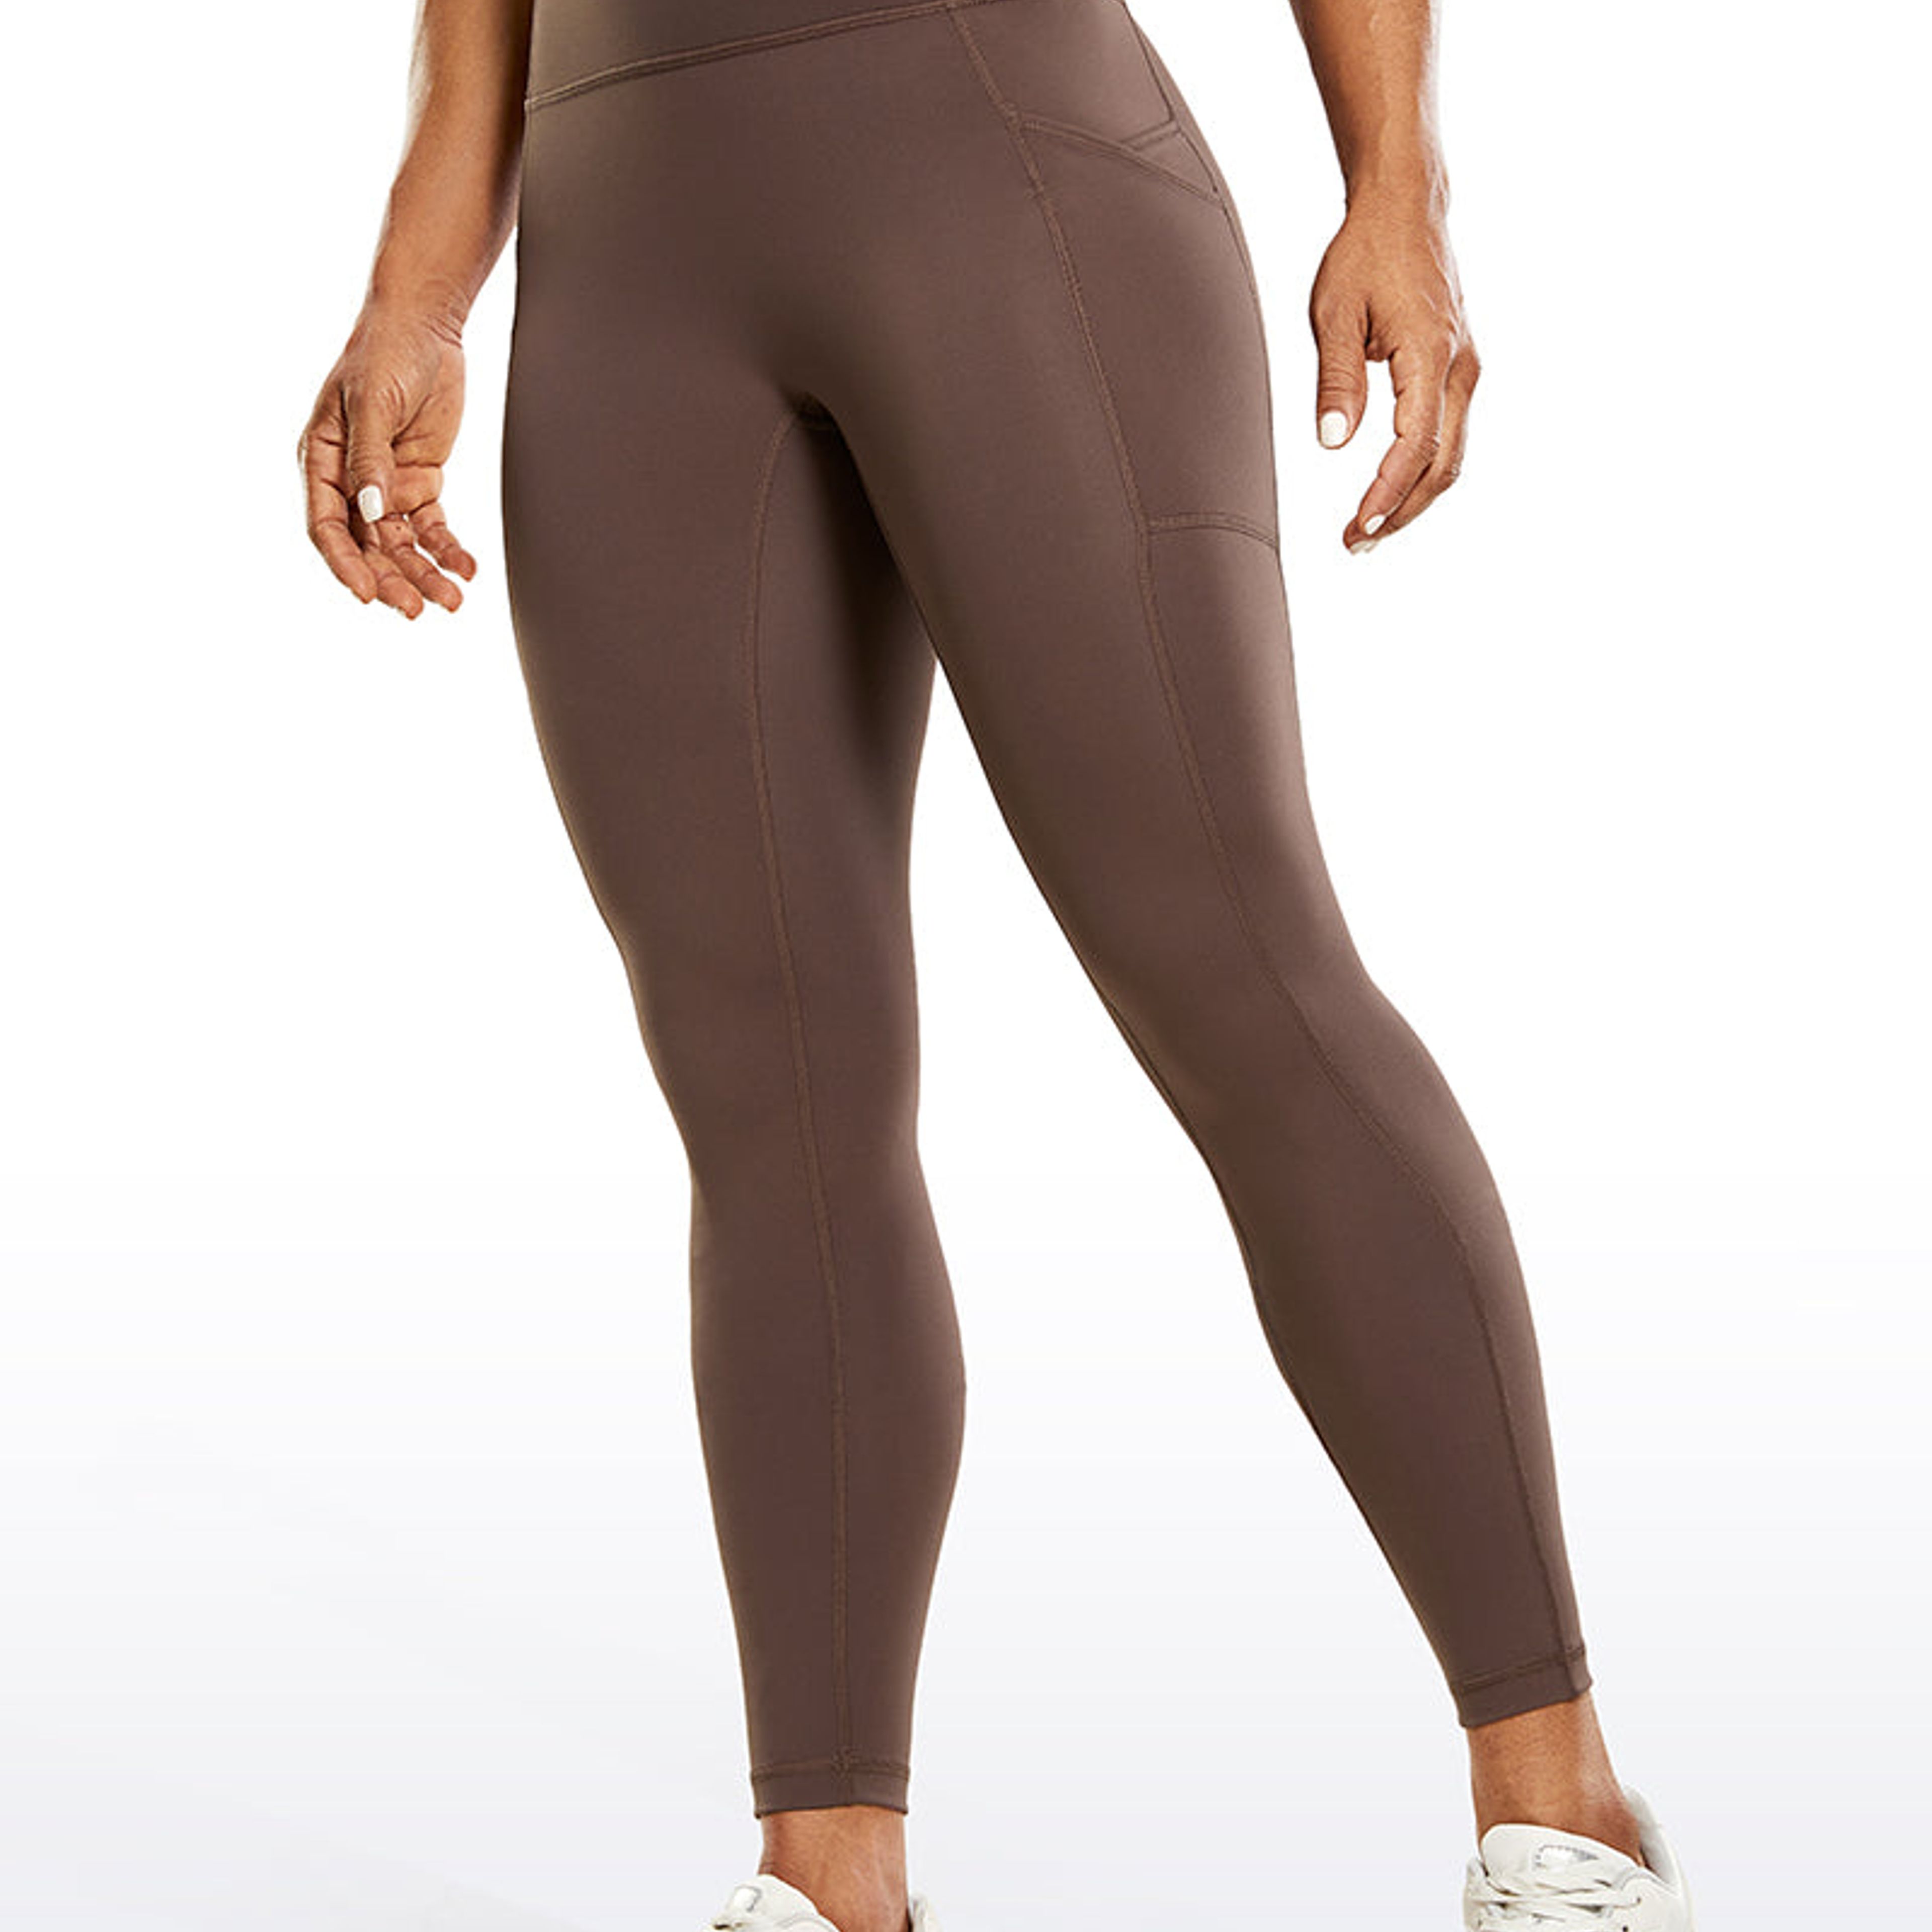 Crz Yoga Ulti-Dry Workout Pockets Leggings 25''-No Front Seam on